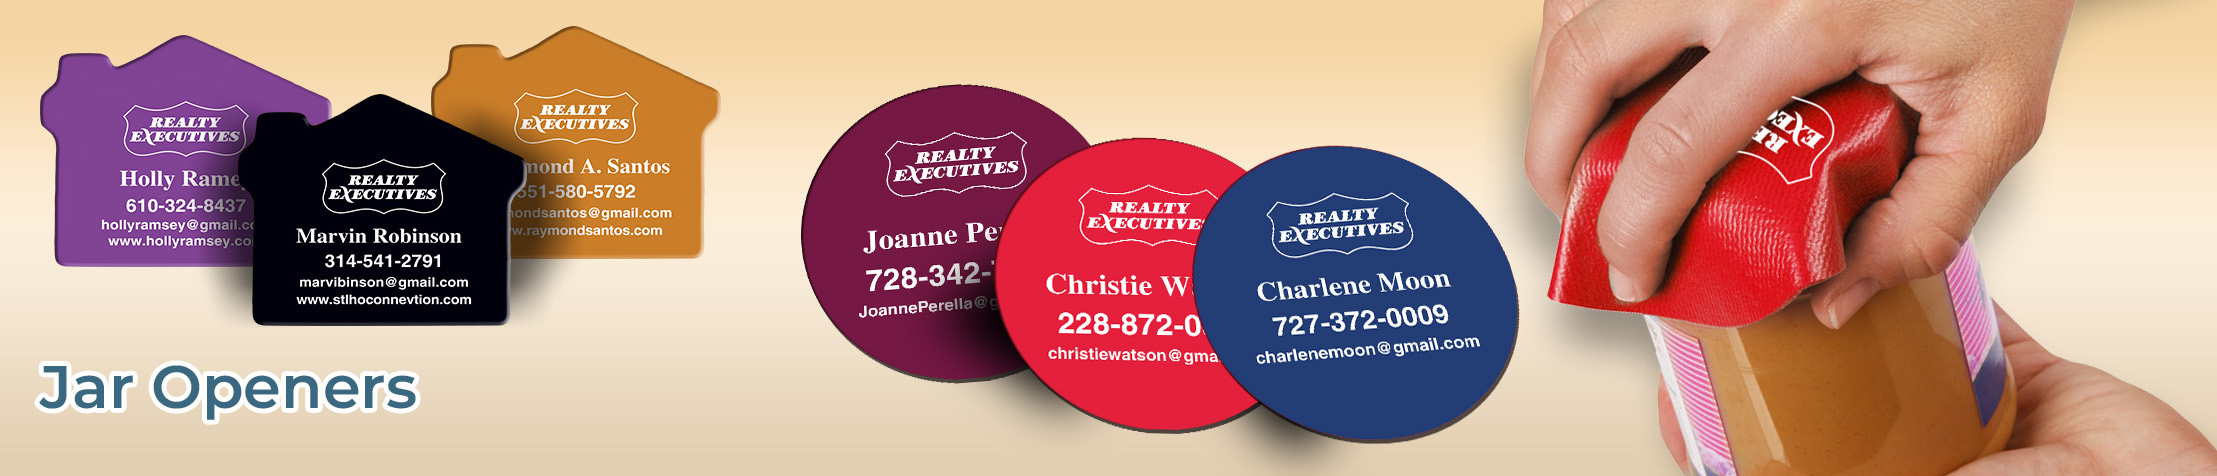 Realty Executives Real Estate Jar Openers - Realty Executives personalized realtor promotional products | BestPrintBuy.com